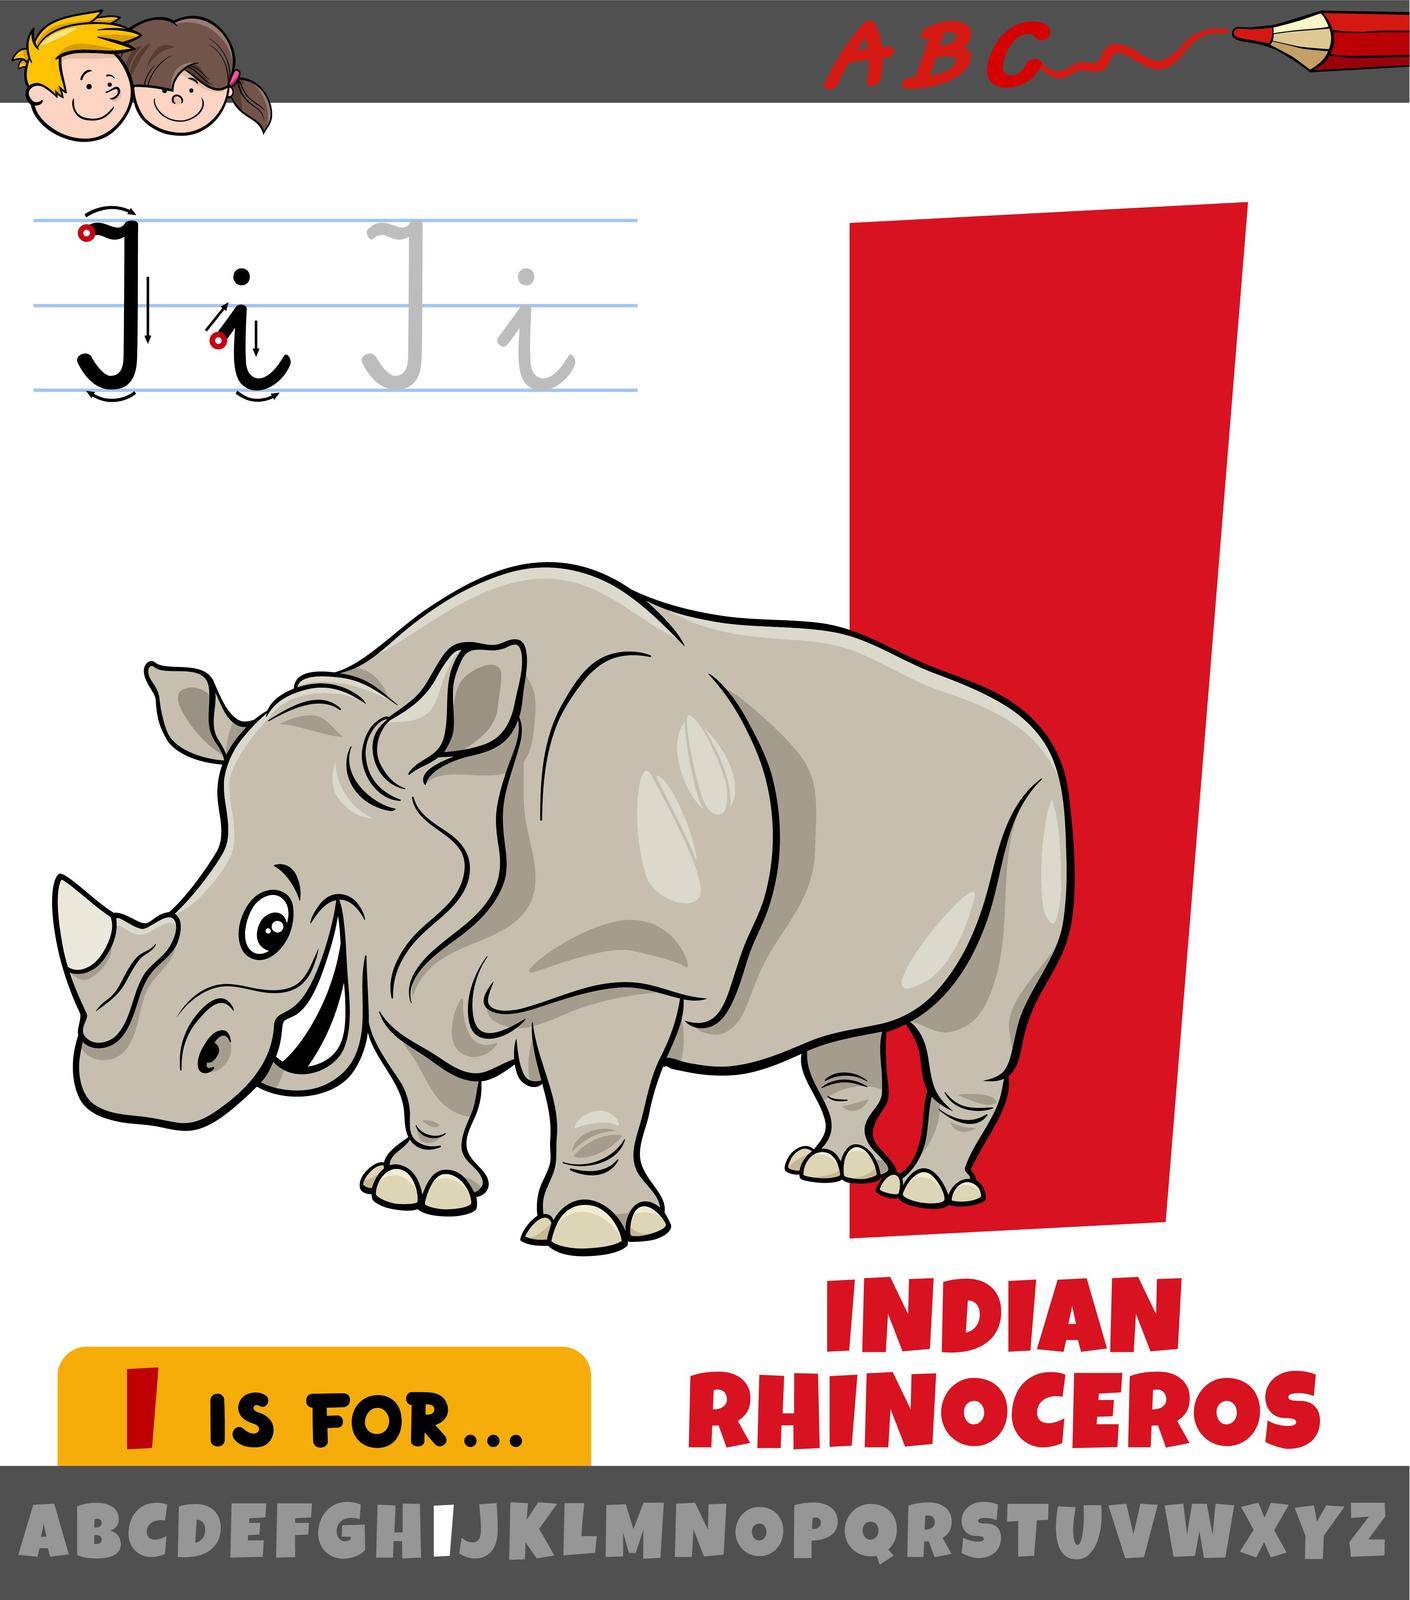 Educational cartoon illustration of letter I from alphabet with Indian rhinoceros animal character